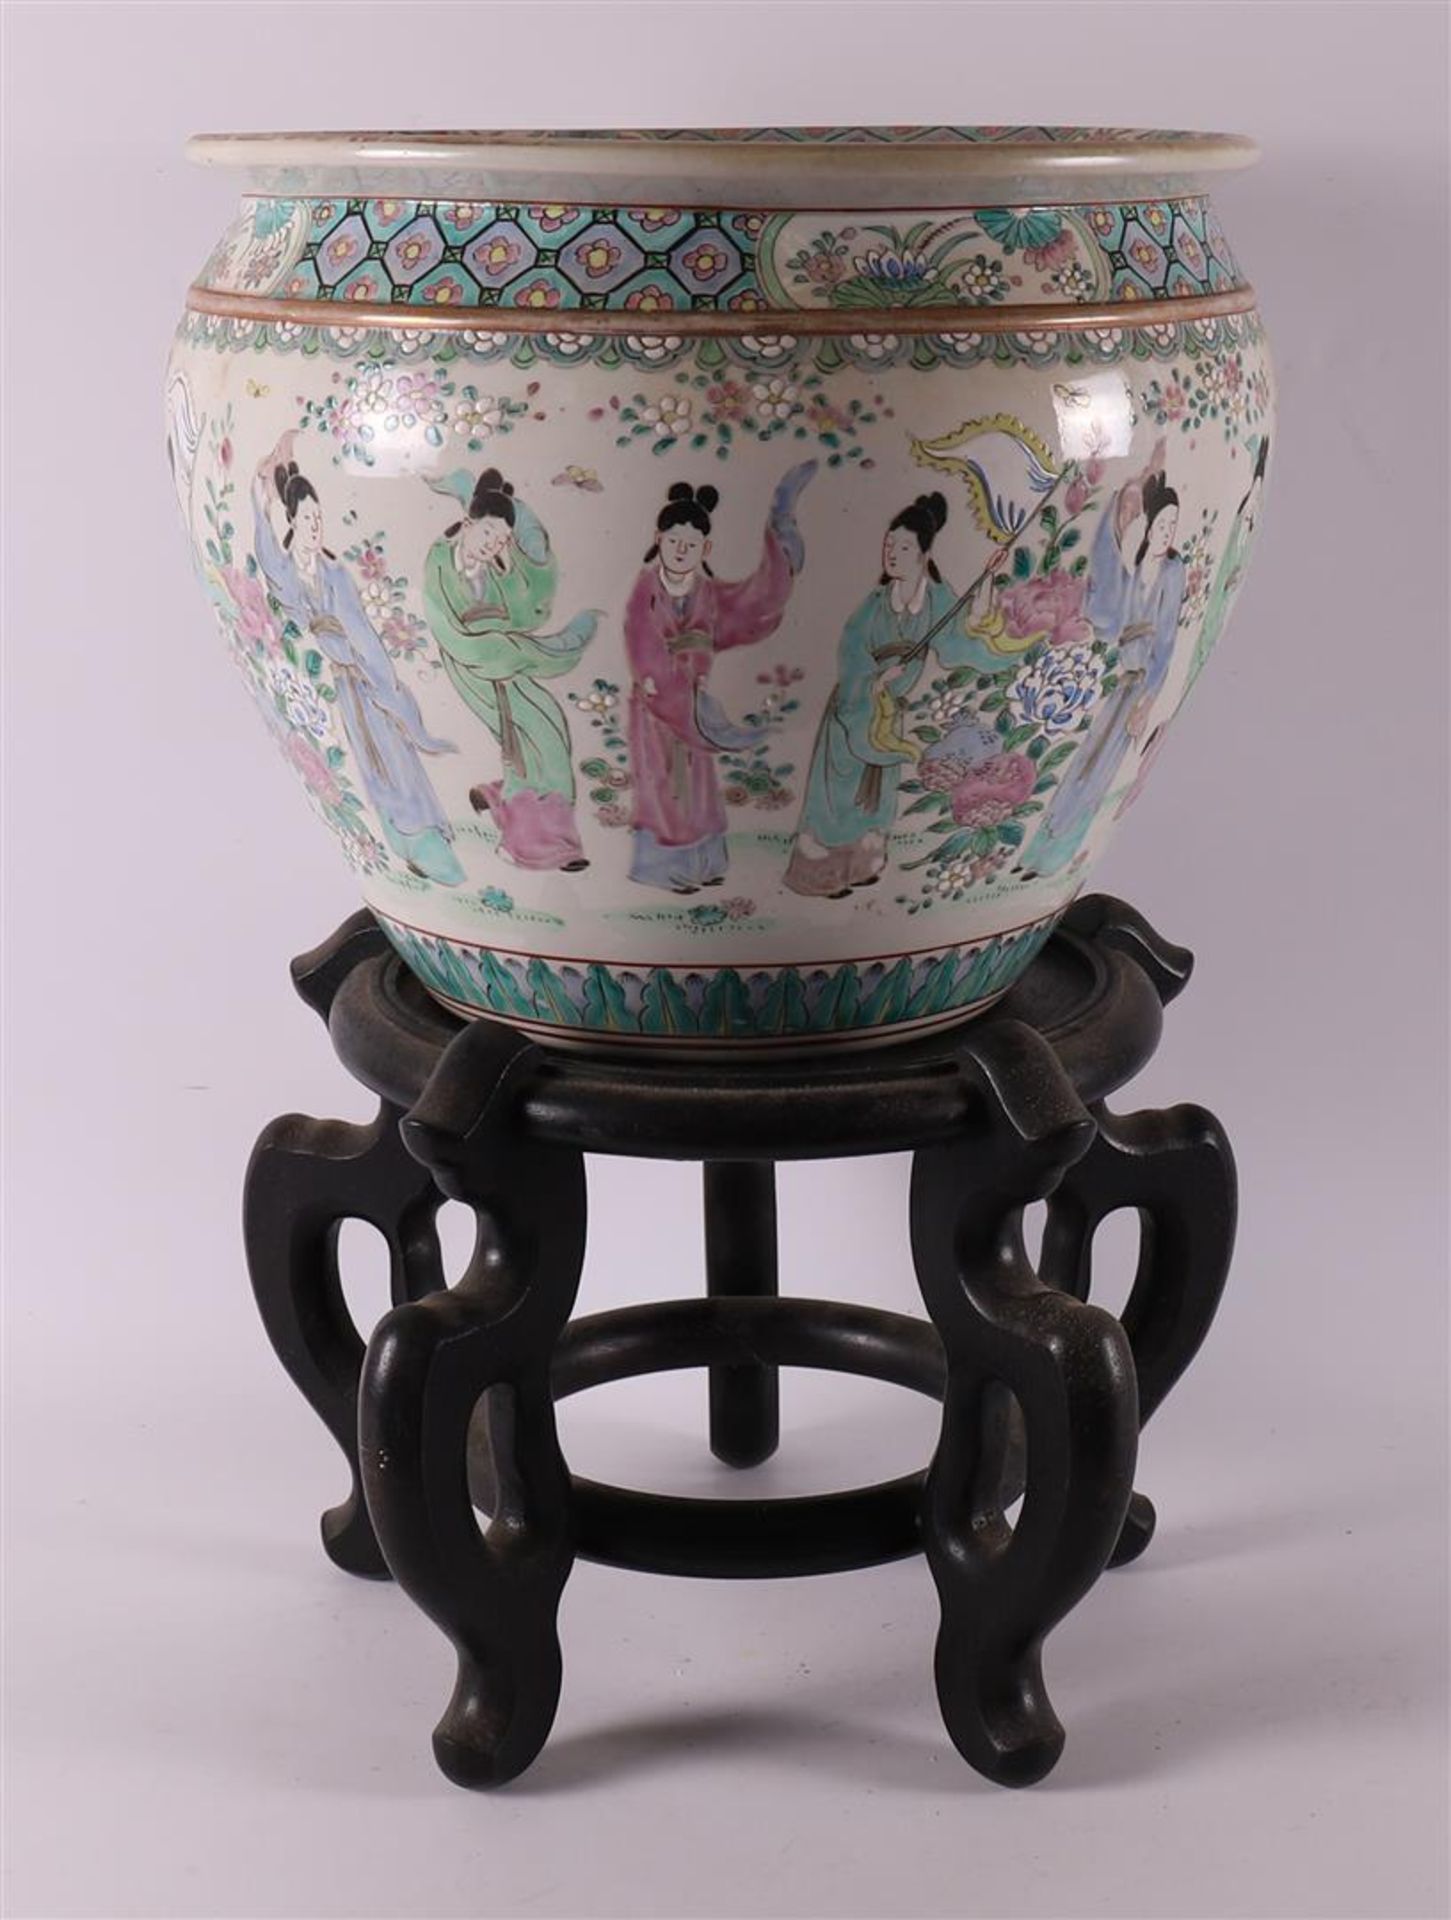 A porcelain cachepot or fishbowl on a loose wooden base, China, 20th century. - Bild 2 aus 7